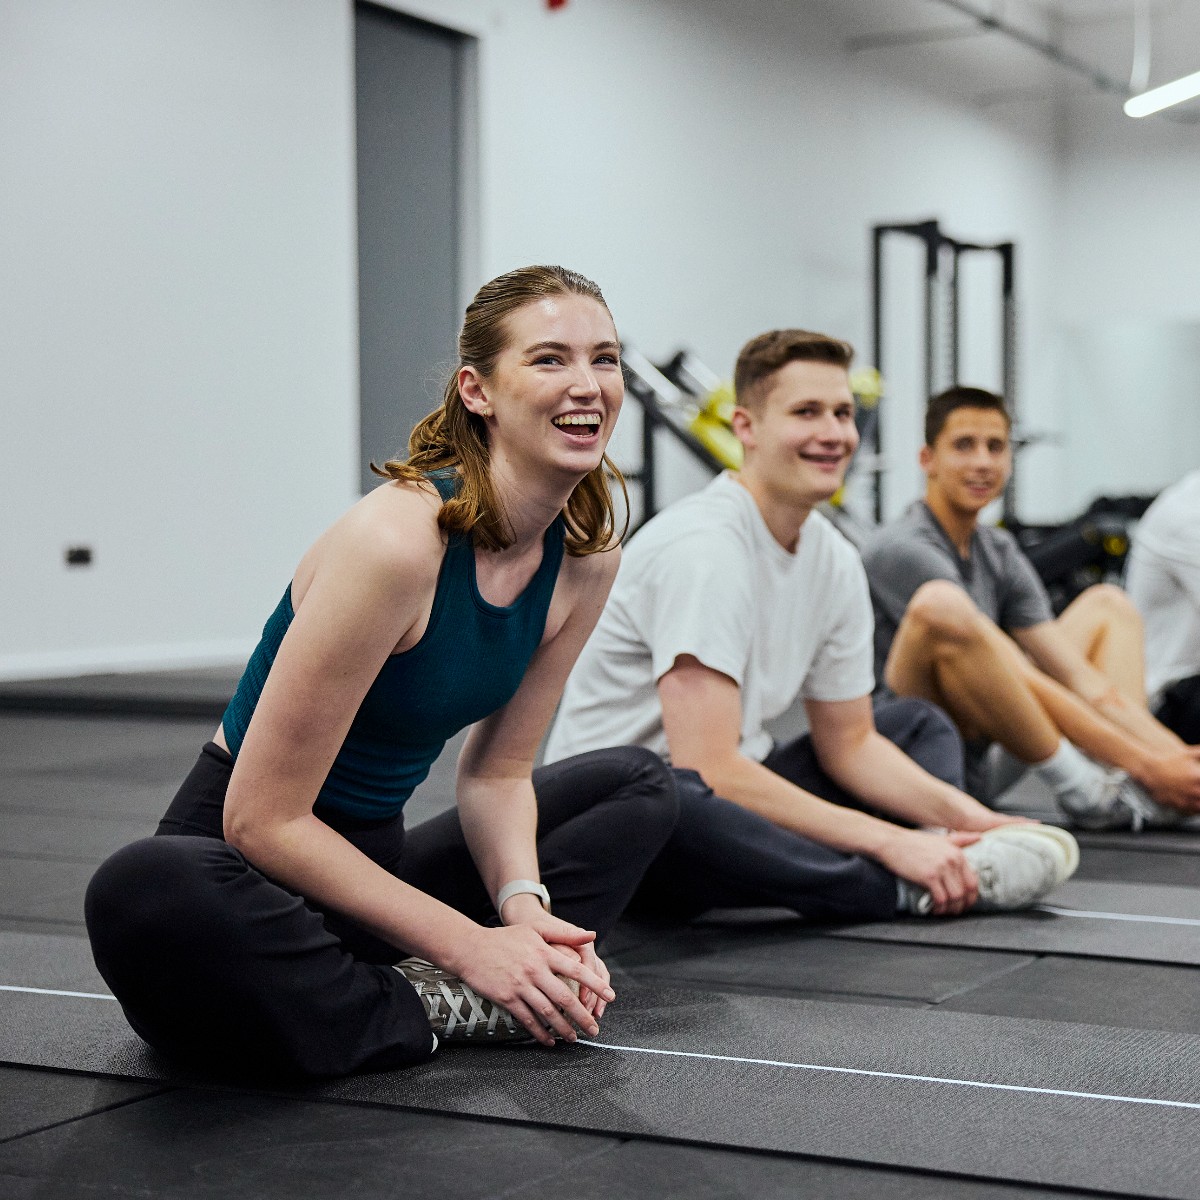 Get ready to sweat 💪 Our new Fitness Classes and Memberships are now open for bookings ahead of opening day on Wednesday 1 May. Secure your spot now and let's crush those fitness goals together 👉 brnw.ch/21wJcJR